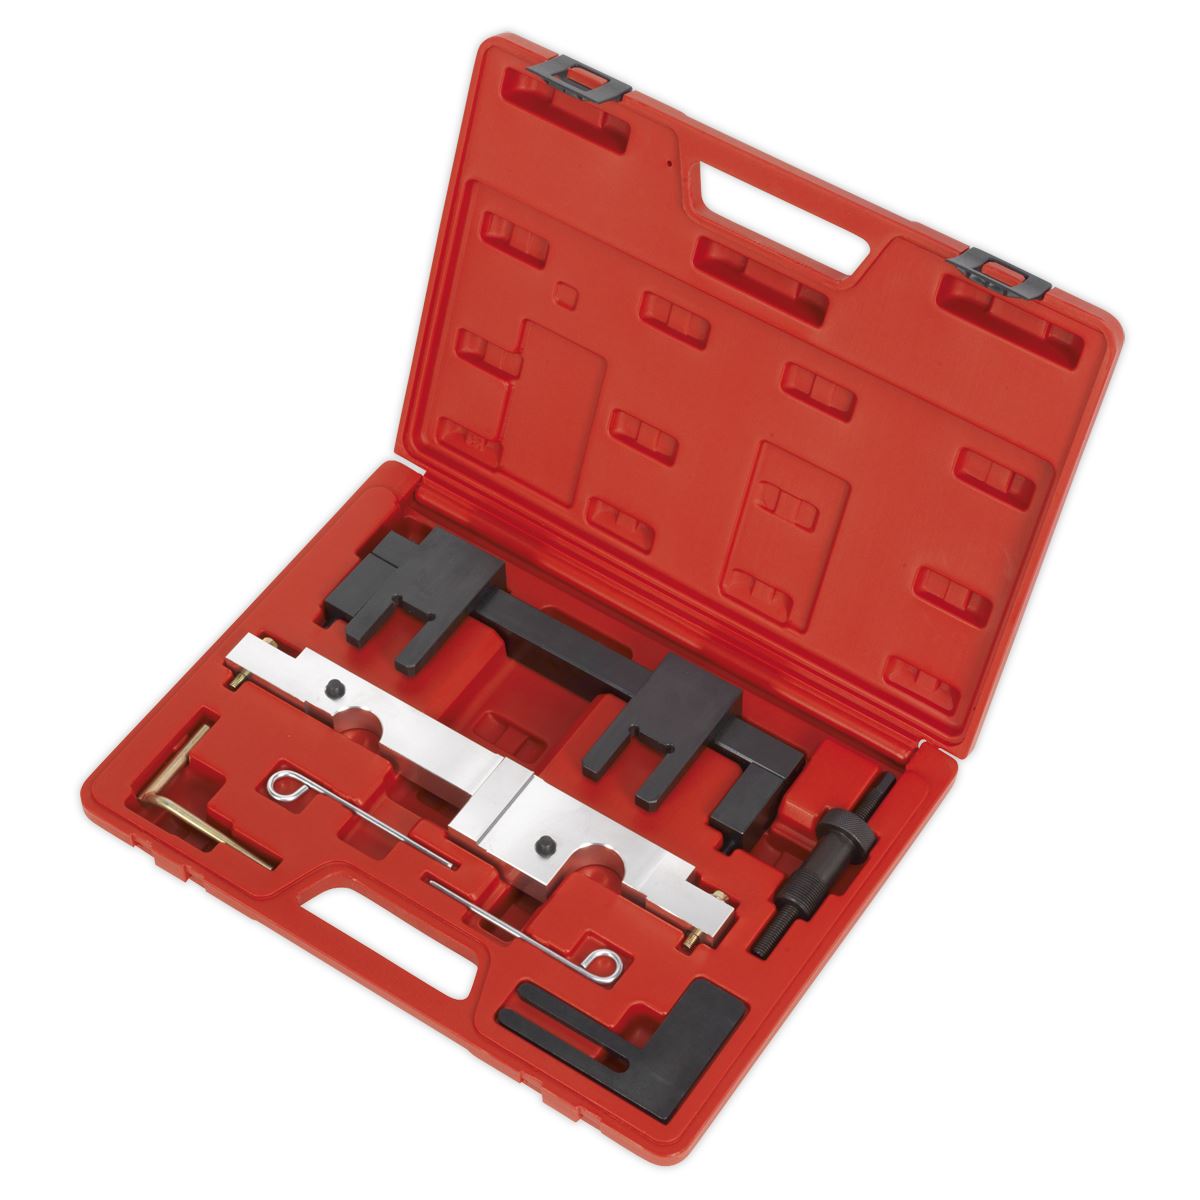 Sealey Petrol Engine Timing Tool Kit - for BMW 1.6/2.0 N43 - Chain Drive